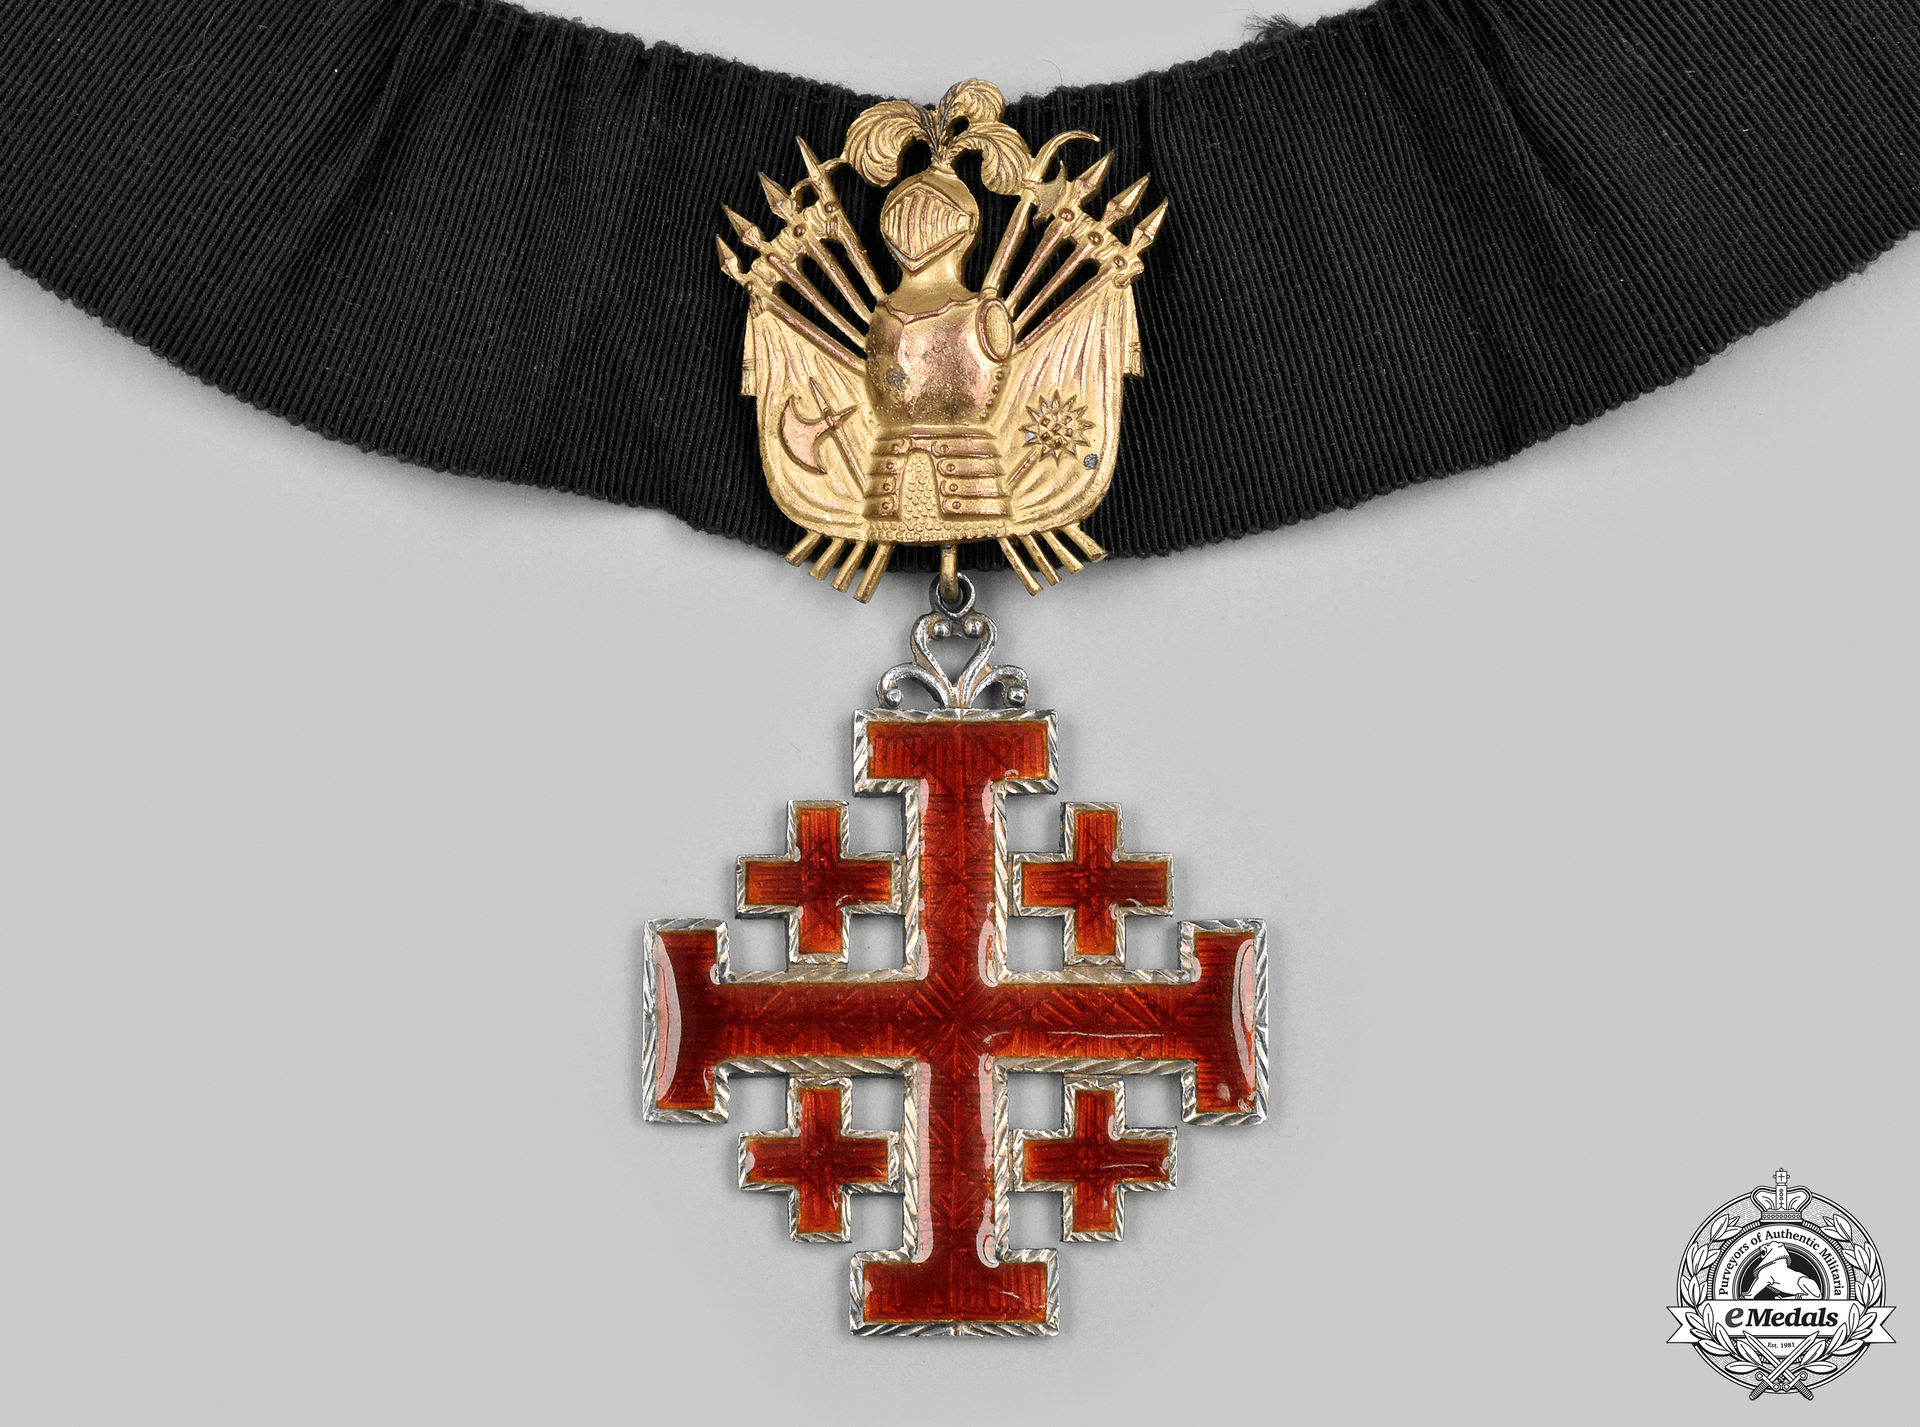 vatican._an_order_of_the_holy_sepulchre_of_jerusalem,_ii_class_commander_for_gentleman_with_trophy_of_arms,_c.1930_m21_mnc3503_1